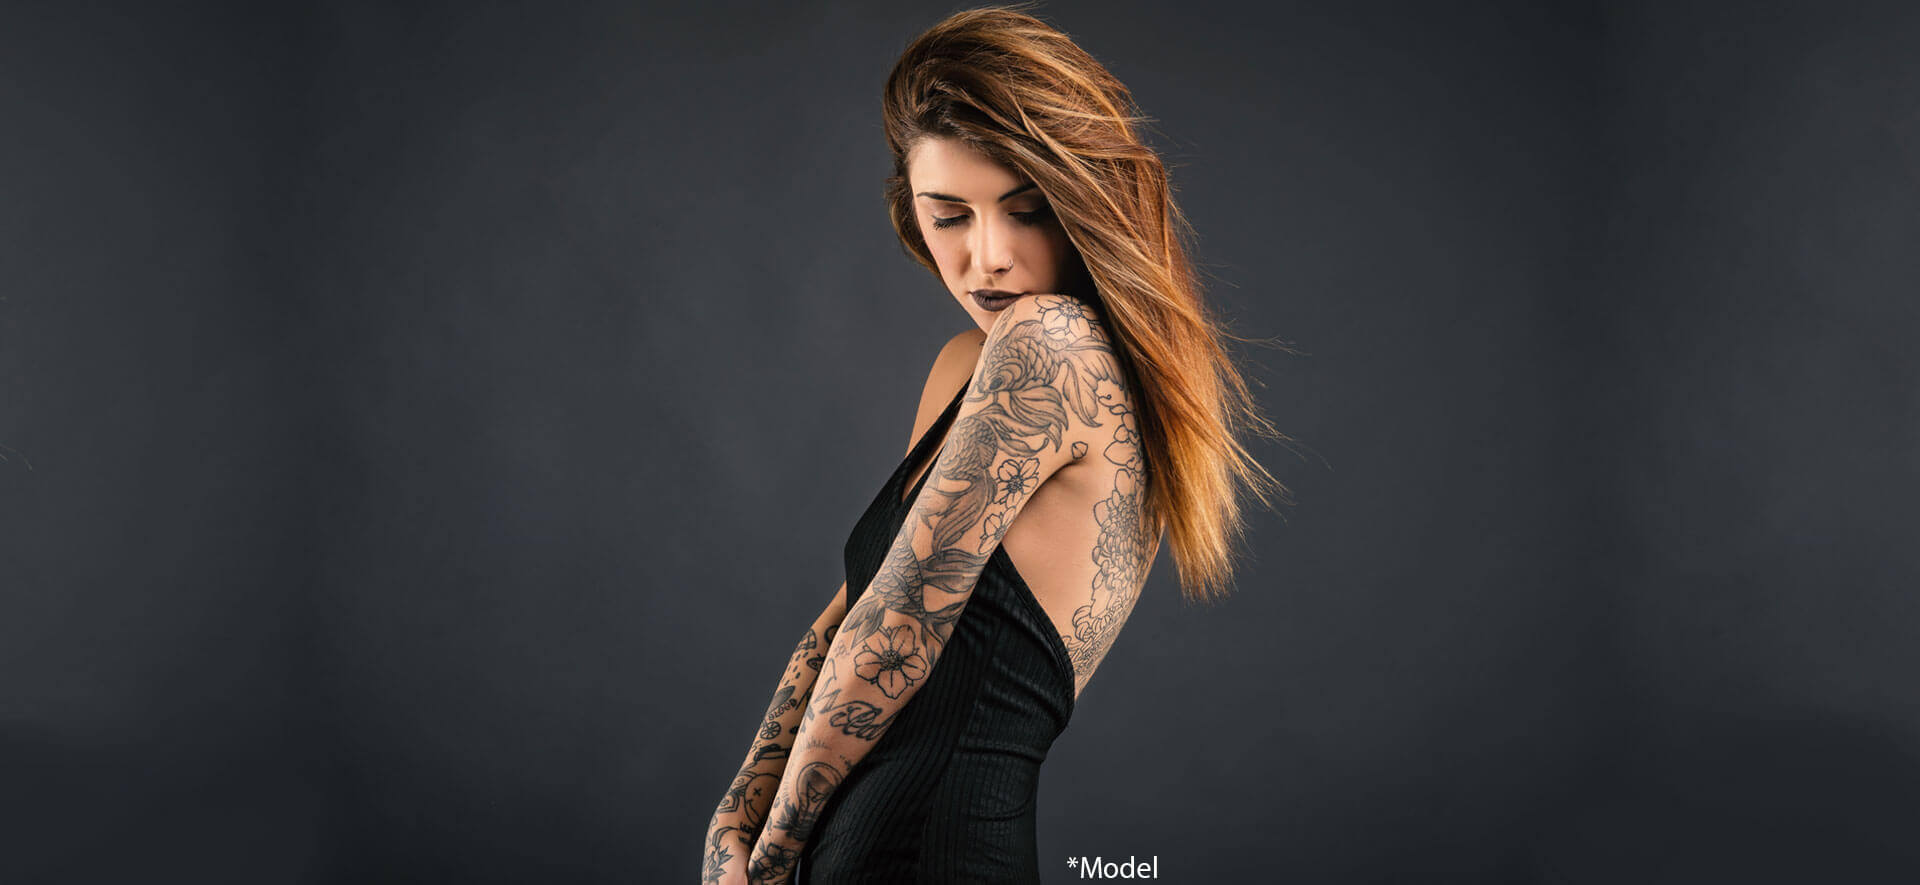 Intimate woman studio portrait with long black dress and tattoos against dark background